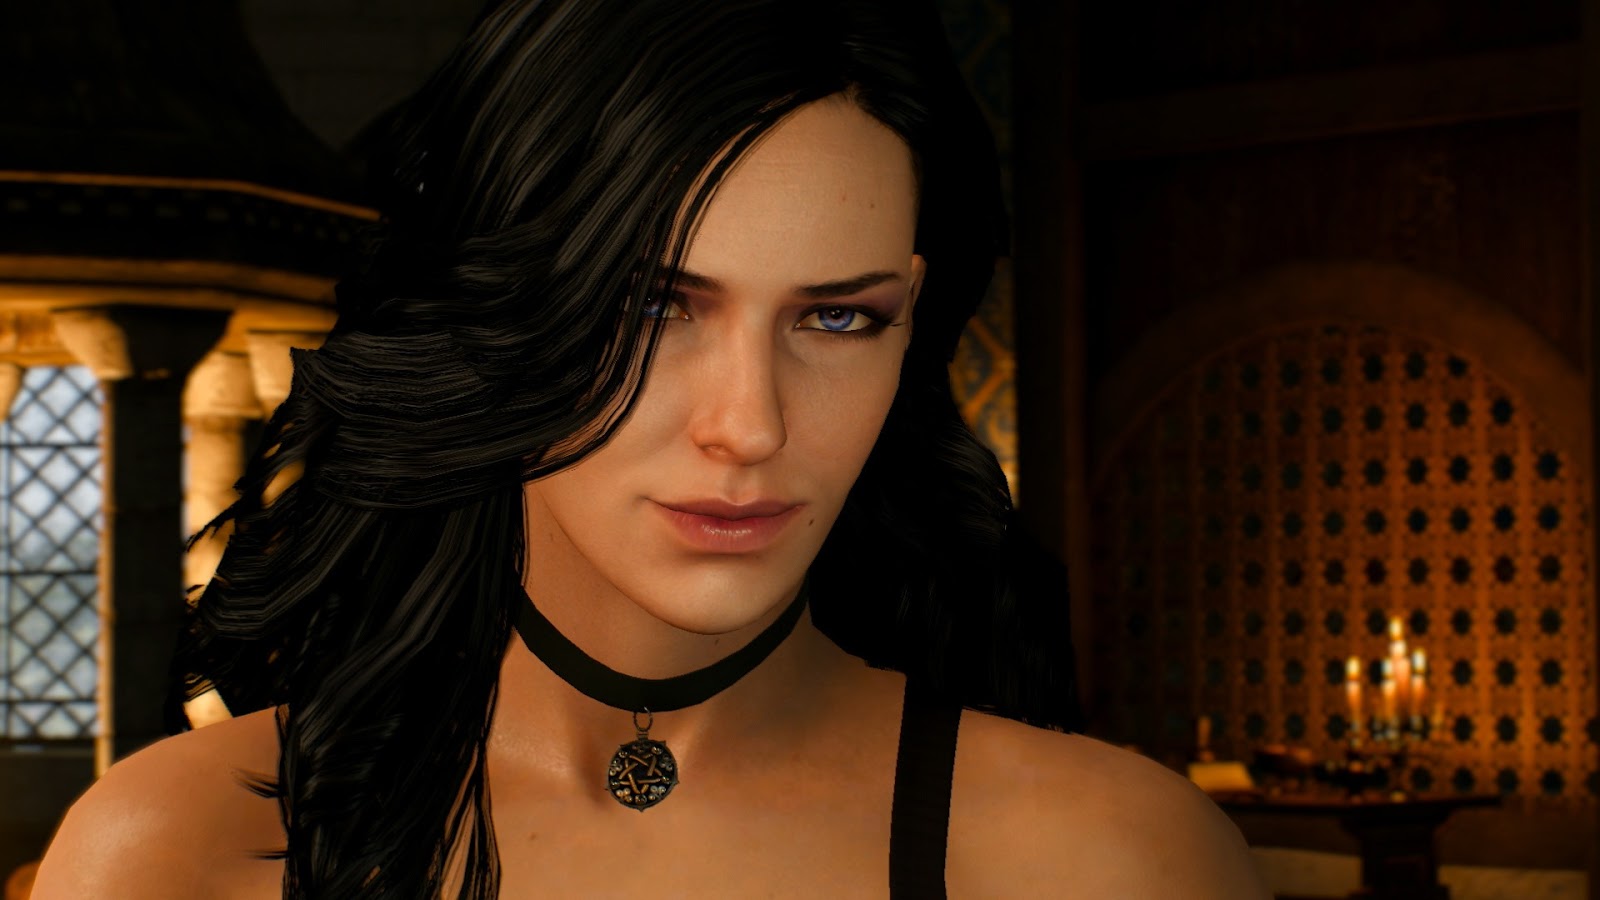 Reasons Why Yennefer of Vengerberg is Our Favorite - Bookstr